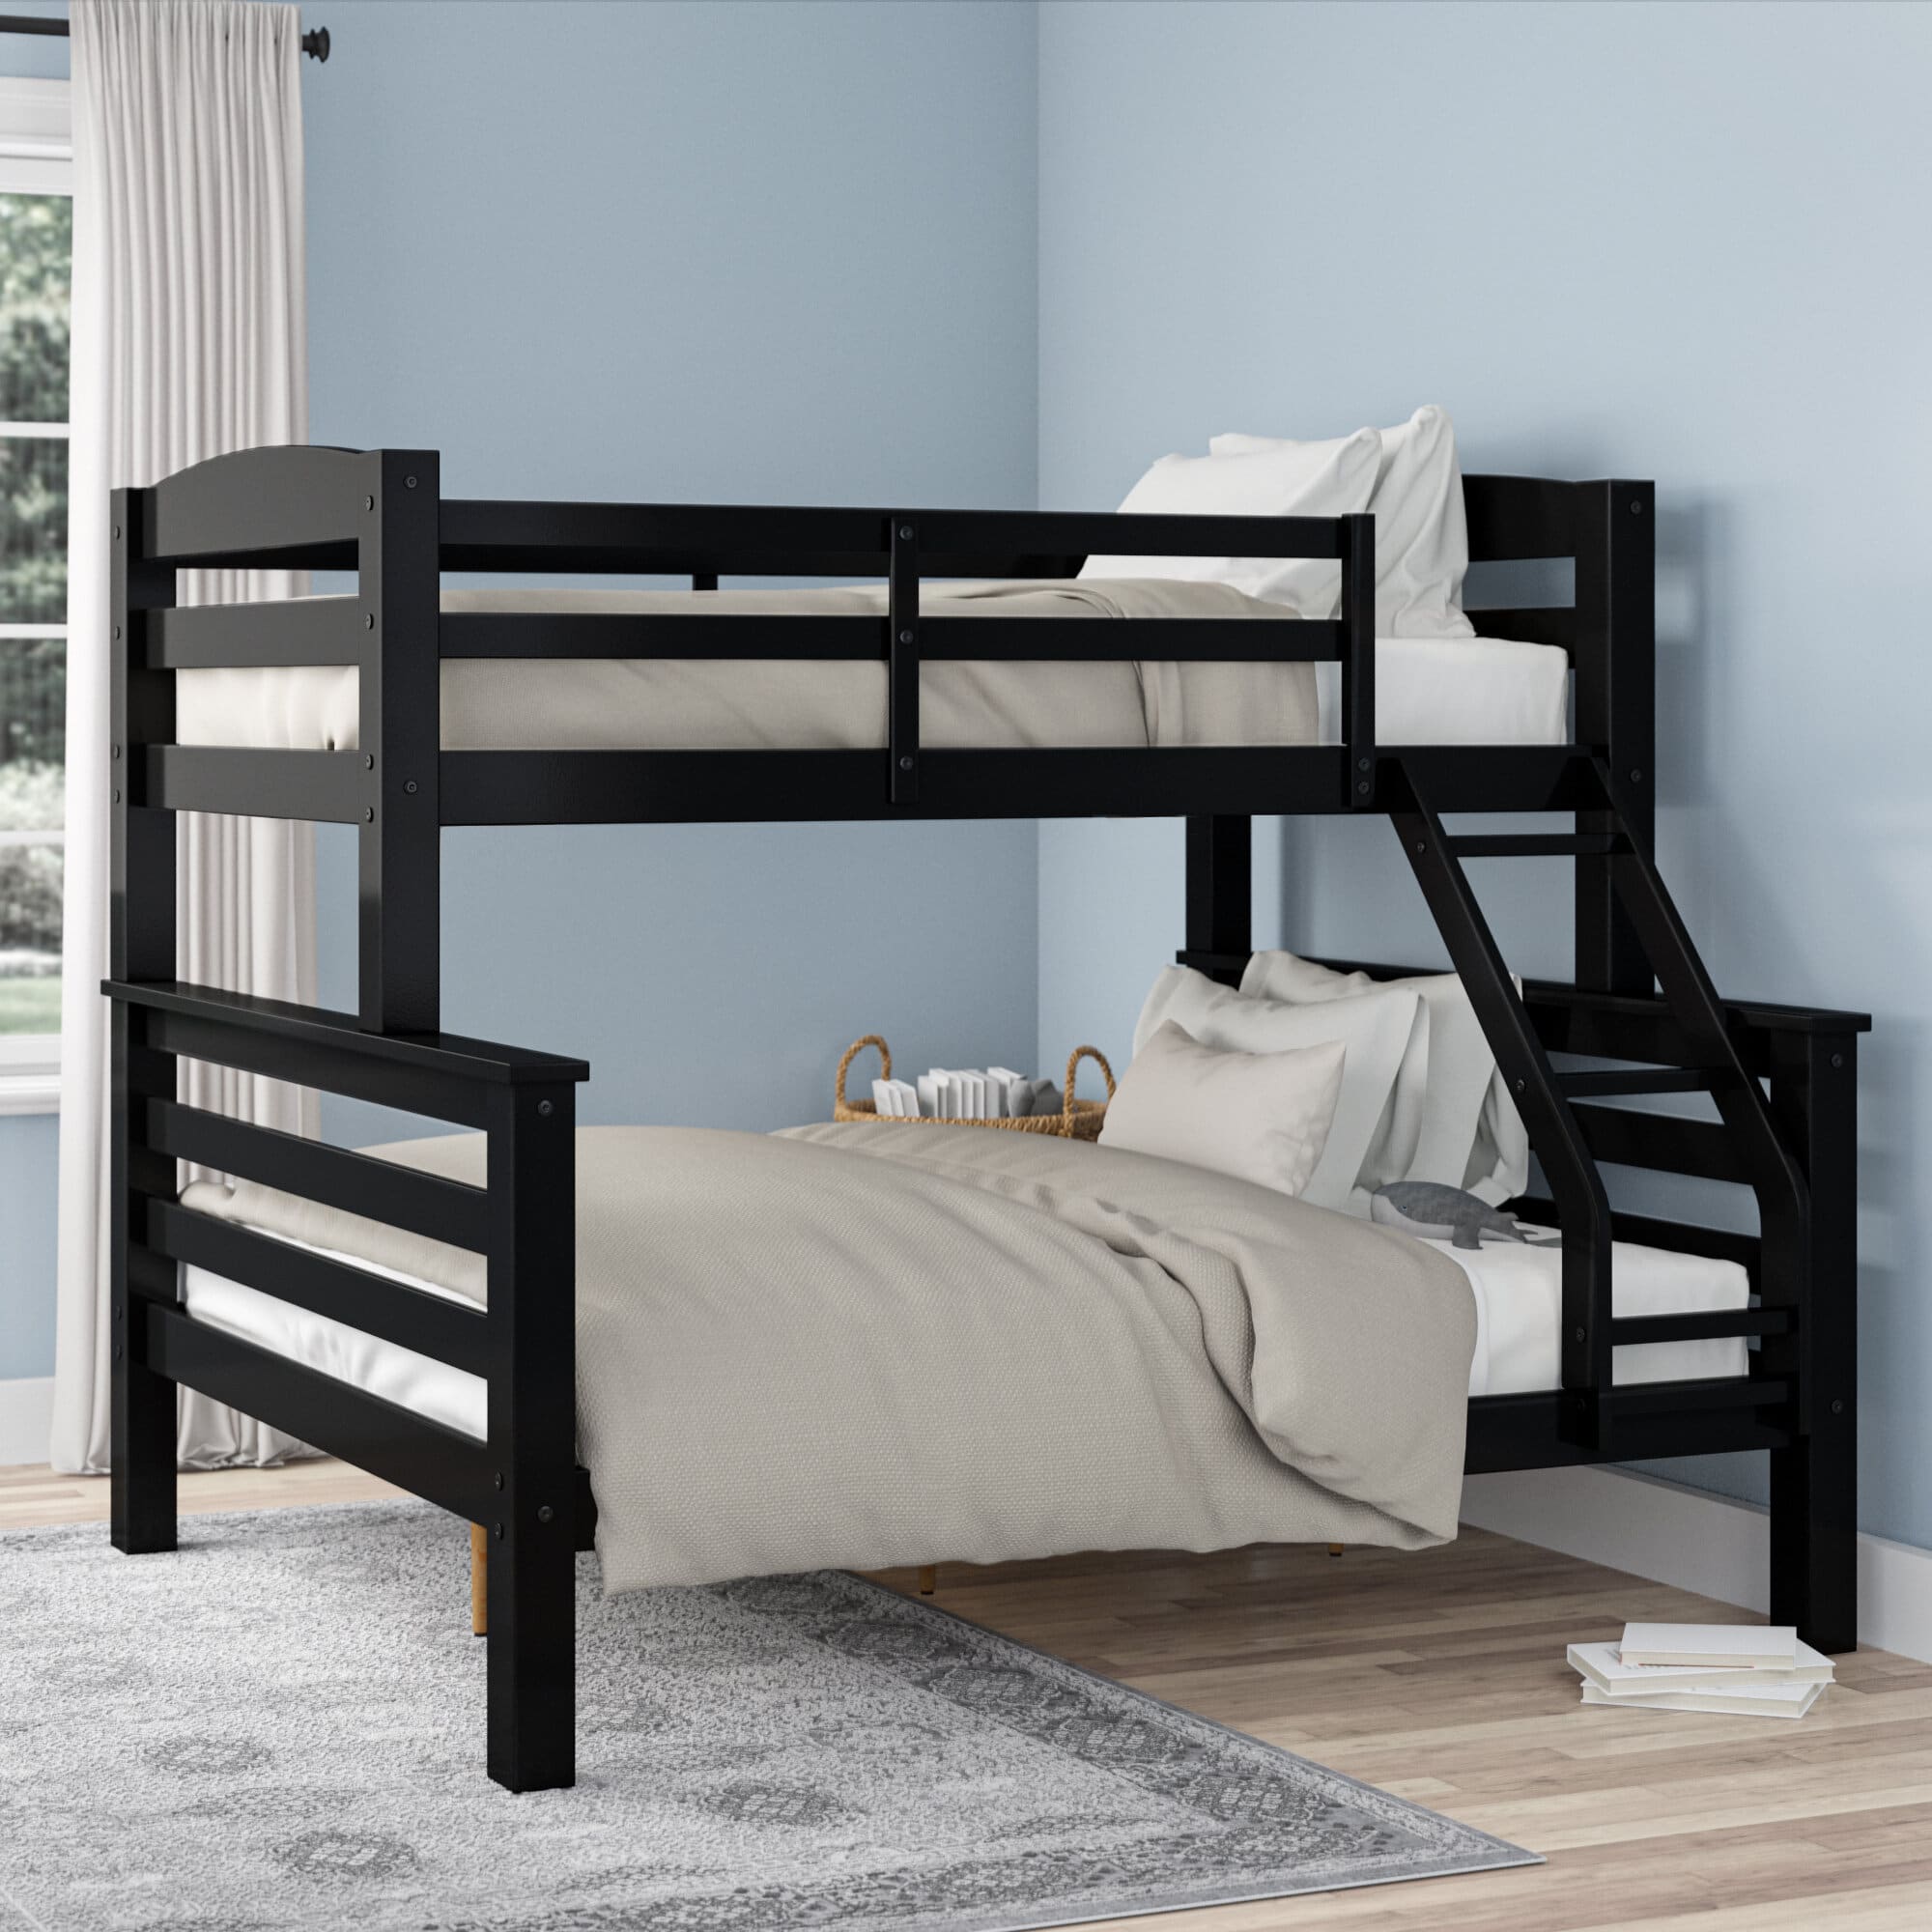 6 Best Twin Over Full Bunk Beds May, Bunk Beds With Full Bed On Bottom